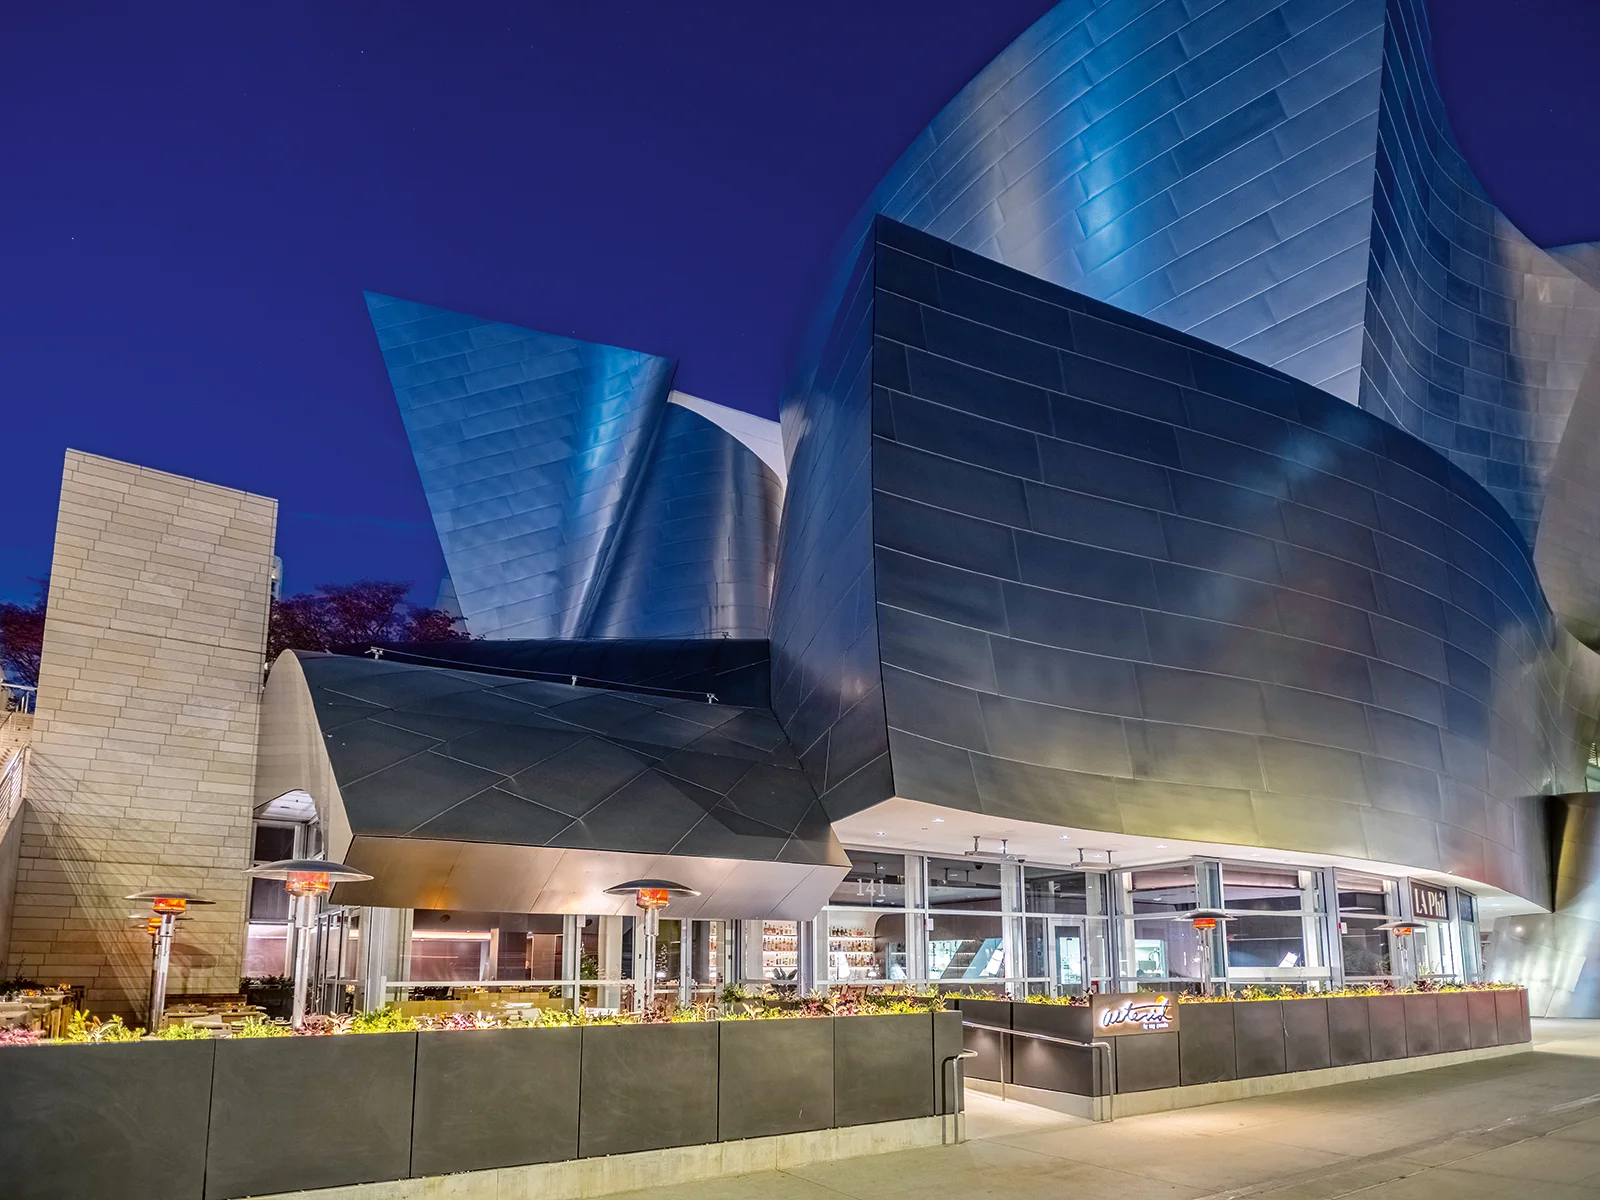 The curved and ultramordern mirrored exterior of the Walt Disney Concert Hall